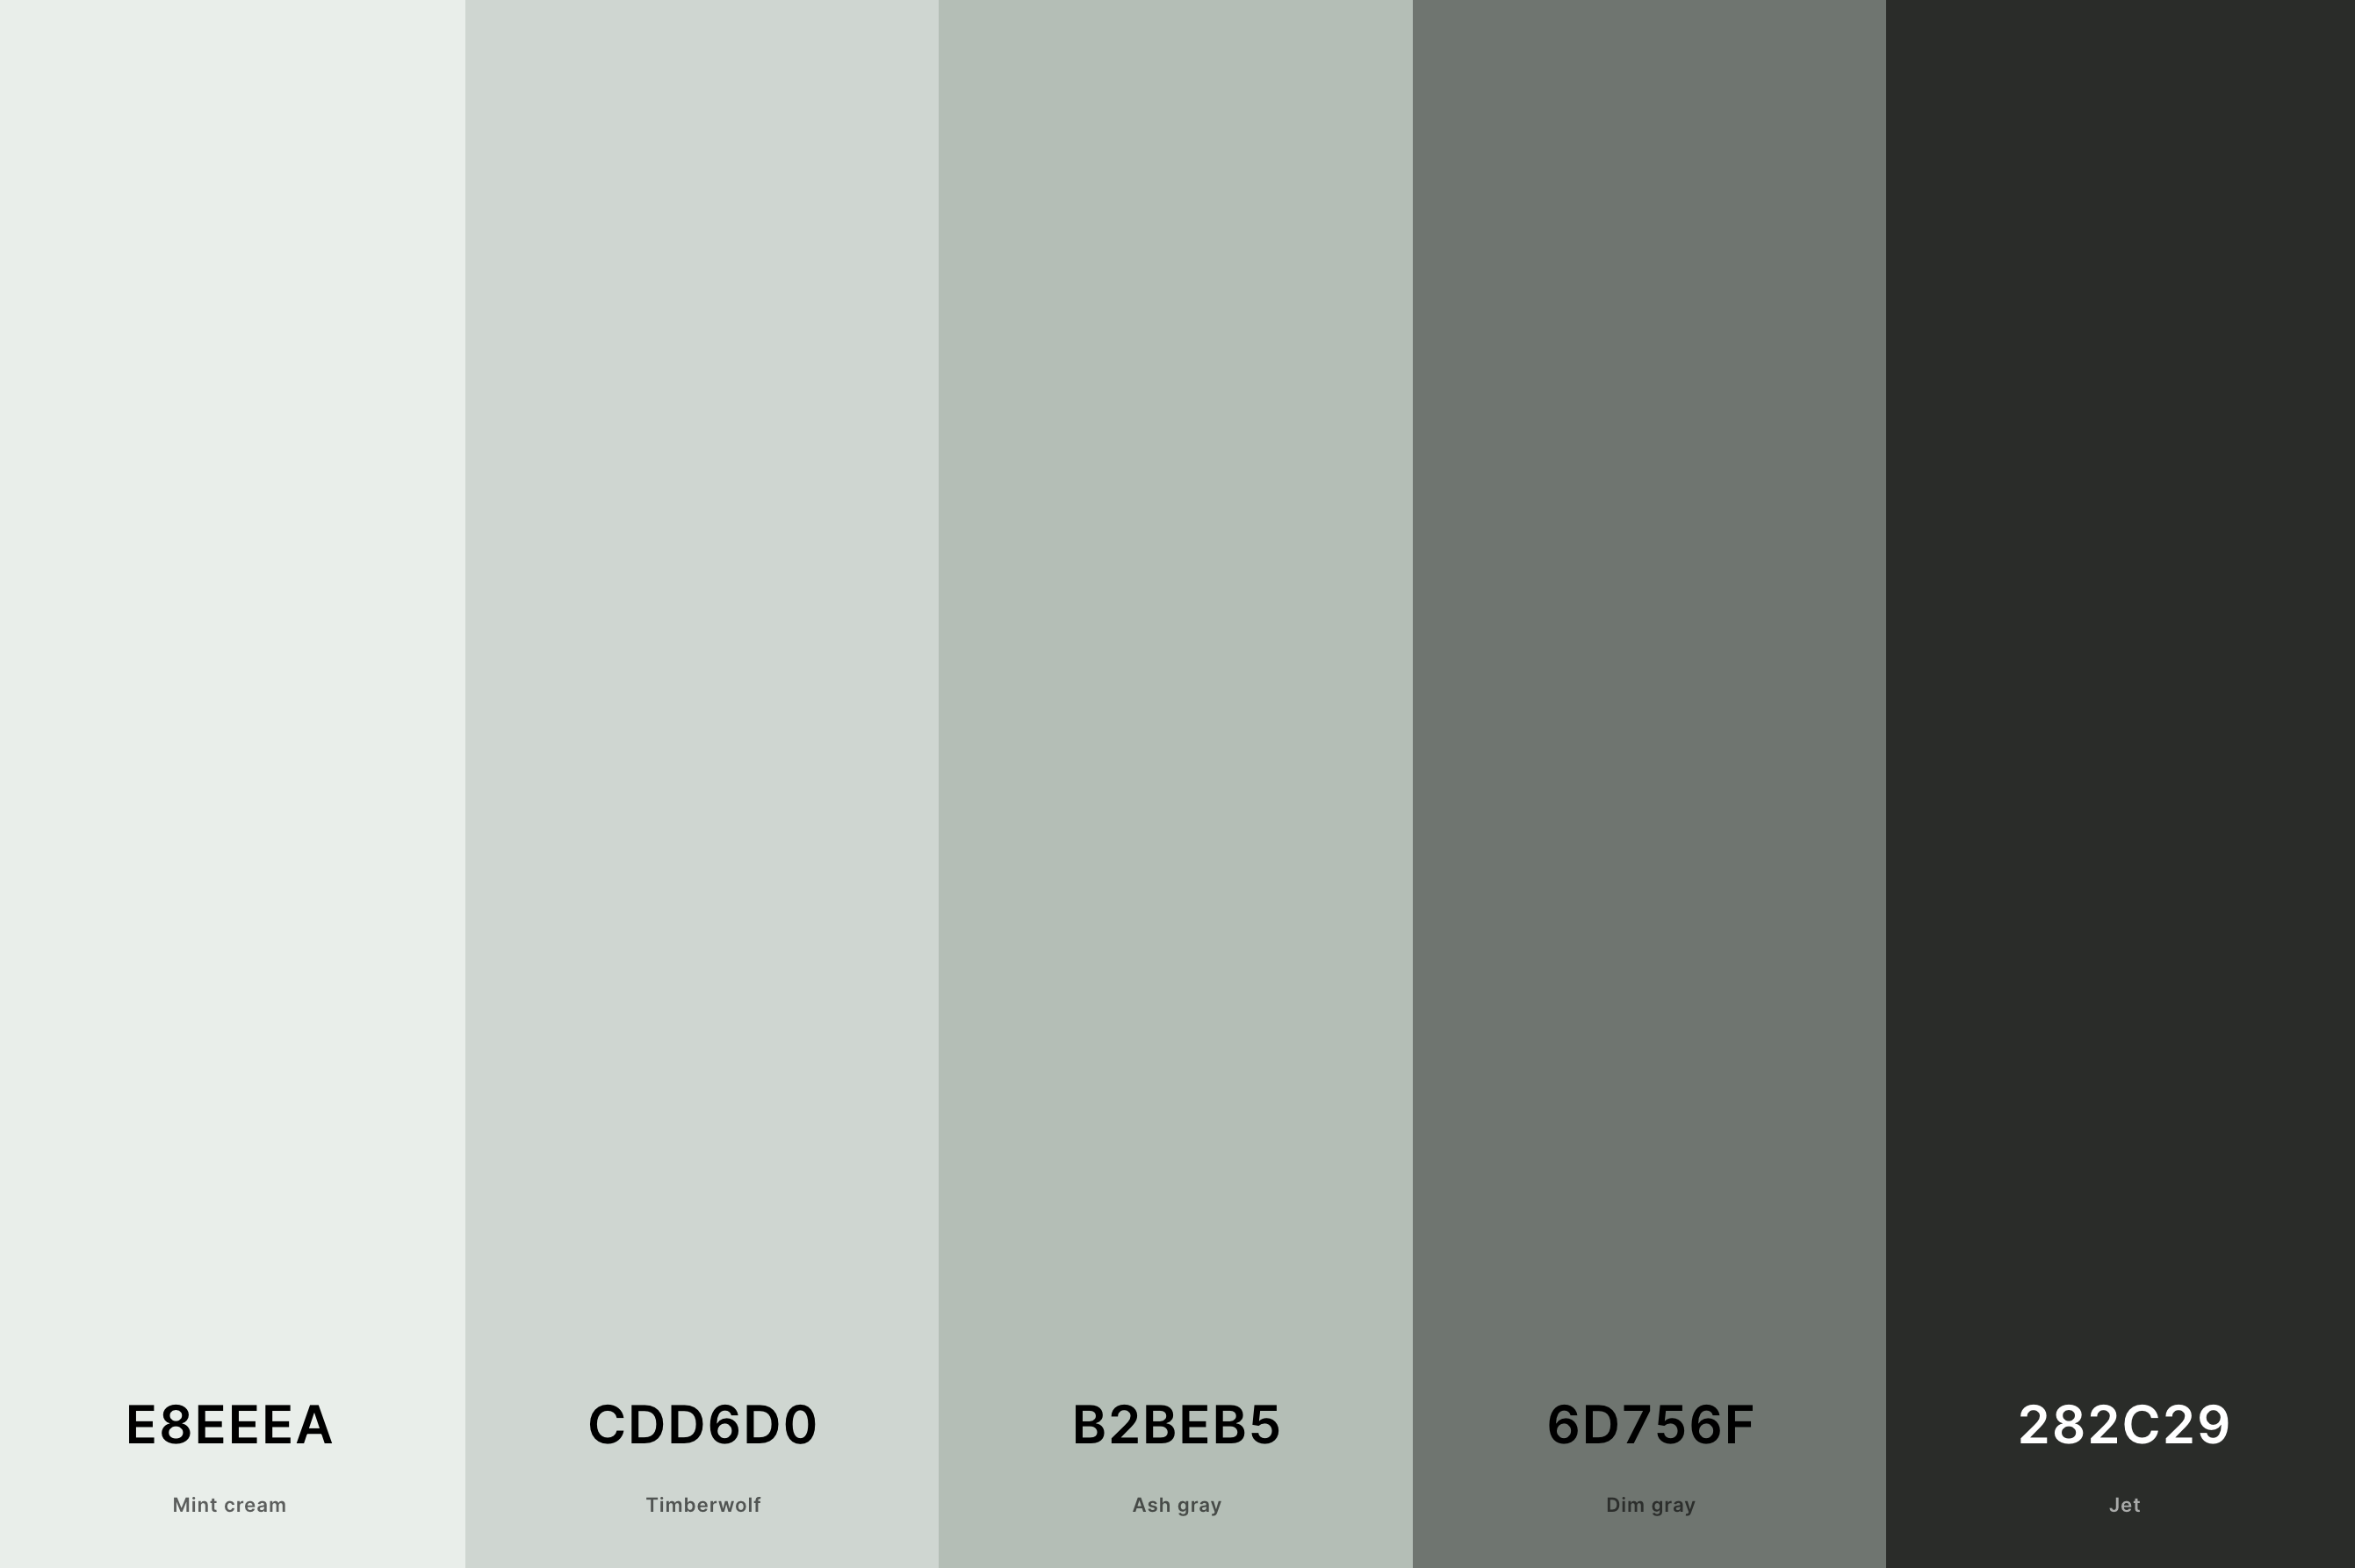 27. Ash Gray Color Palette Color Palette with Mint Cream (Hex #E8EEEA) + Timberwolf (Hex #CDD6D0) + Ash Gray (Hex #B2BEB5) + Dim Gray (Hex #6D756F) + Jet (Hex #282C29) Color Palette with Hex Codes